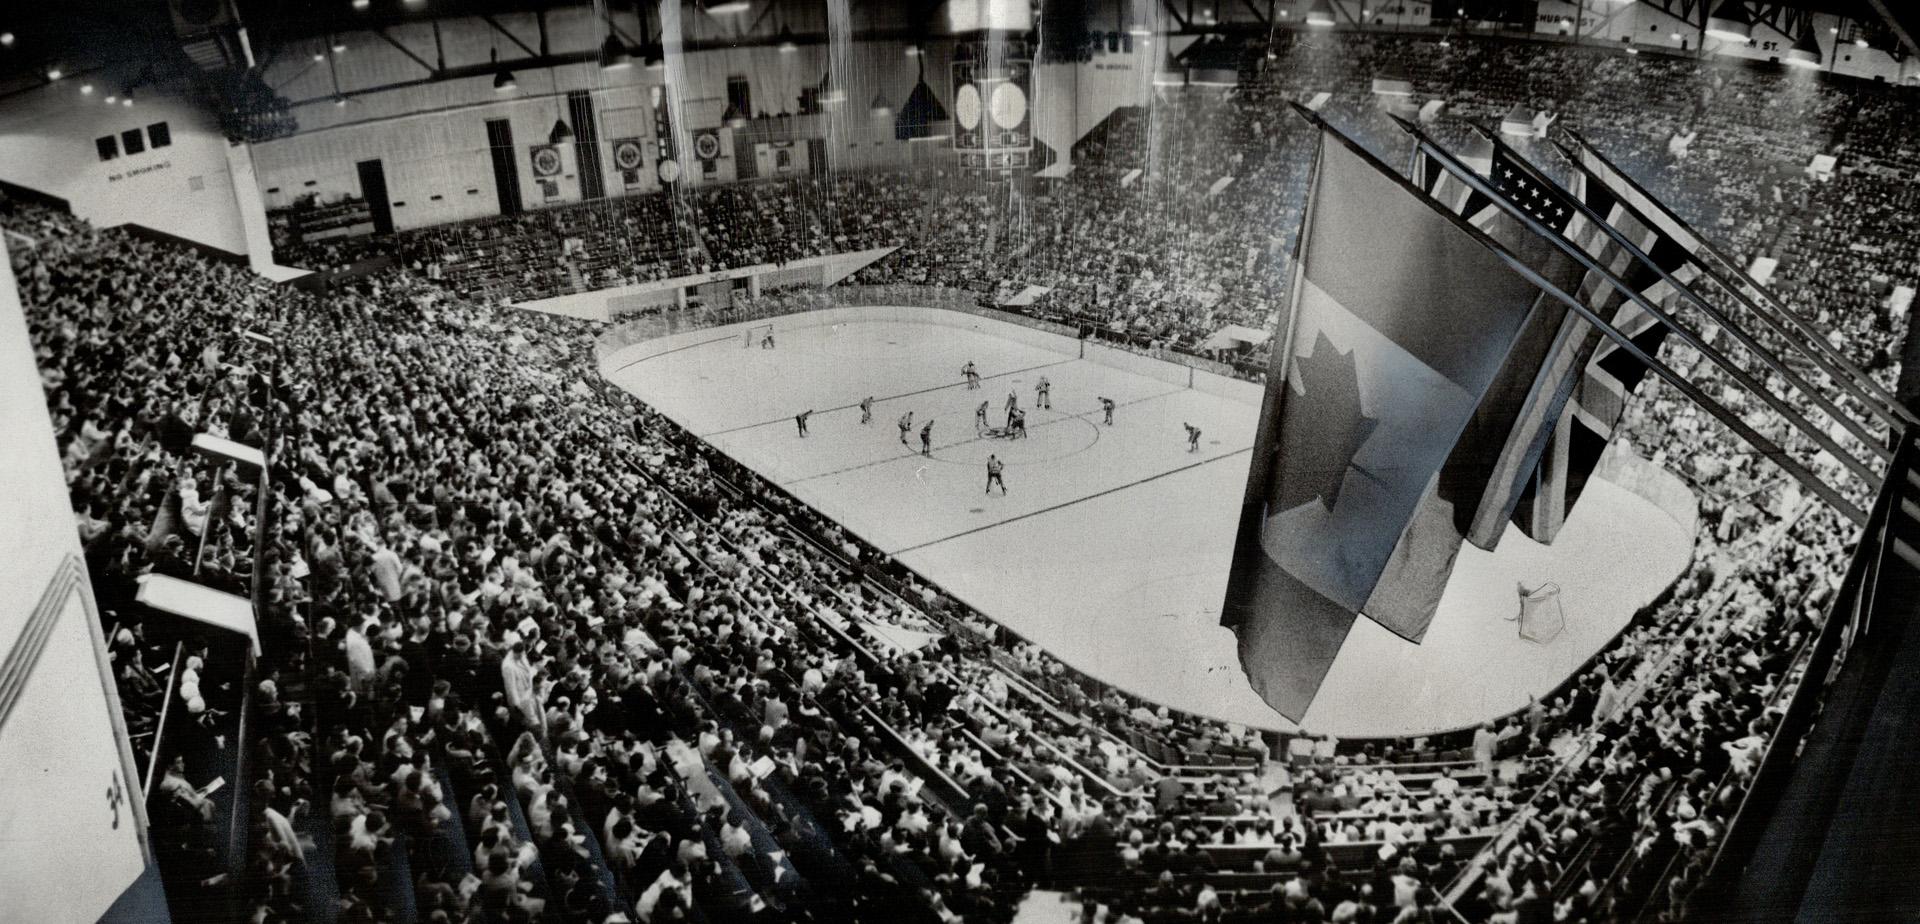 But two new Leafs didn't help. An unannounced change of heart put two new Canadian flags up the pole at Maple Leaf Gardens last night for the Leafs-Ca(...)